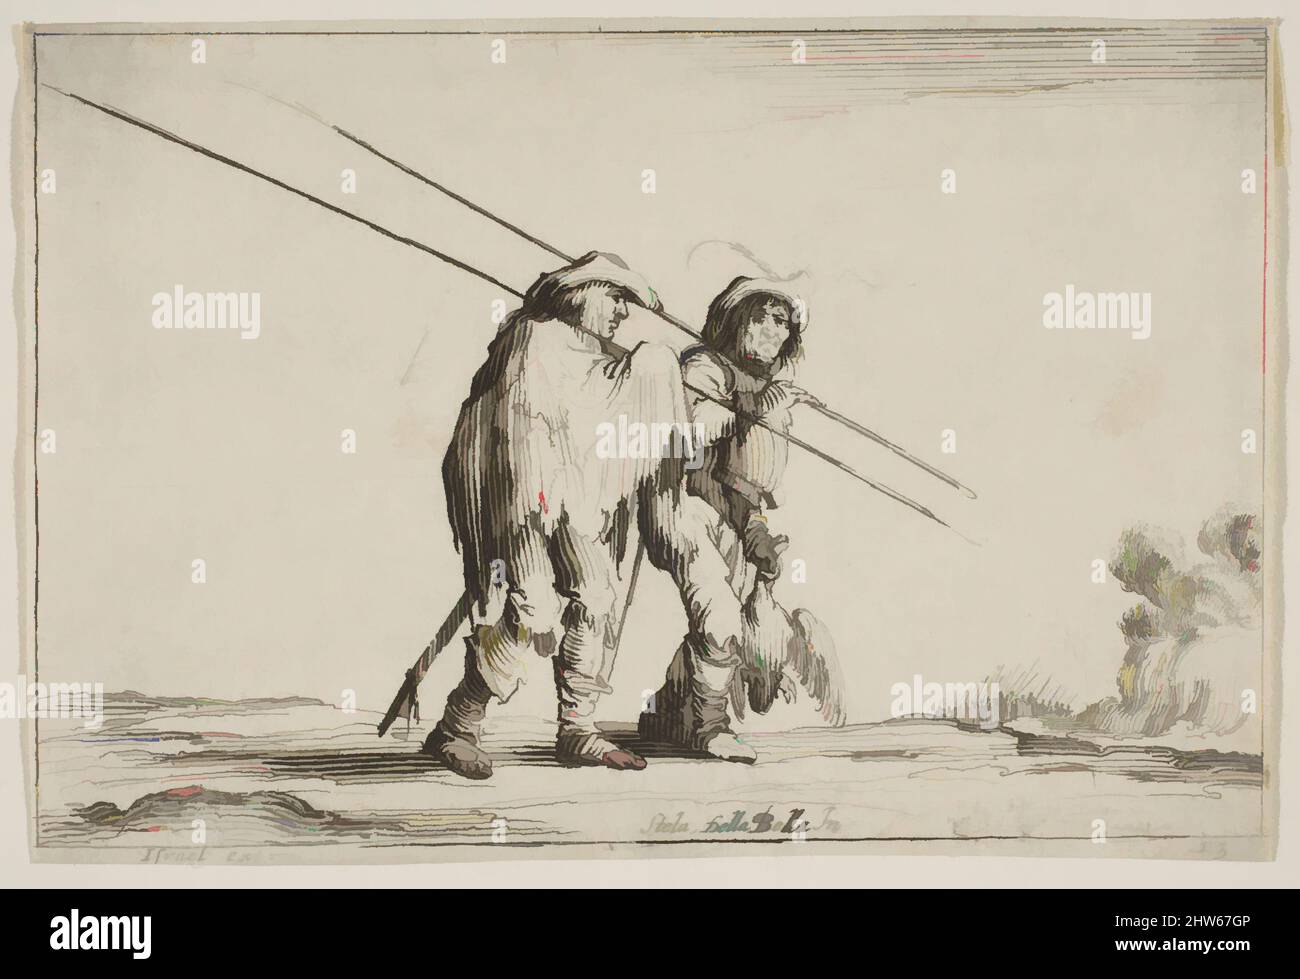 Art inspired by Plate 13: Two pikemen walking towards the right, each with their pikes in their right hands, from 'Various Figures' (Agréable diversité de figures), 1642, Engraving; undescribed state between second and third of five, Sheet: 2 5/8 × 3 15/16 in. (6.7 × 10 cm), Prints, Classic works modernized by Artotop with a splash of modernity. Shapes, color and value, eye-catching visual impact on art. Emotions through freedom of artworks in a contemporary way. A timeless message pursuing a wildly creative new direction. Artists turning to the digital medium and creating the Artotop NFT Stock Photo